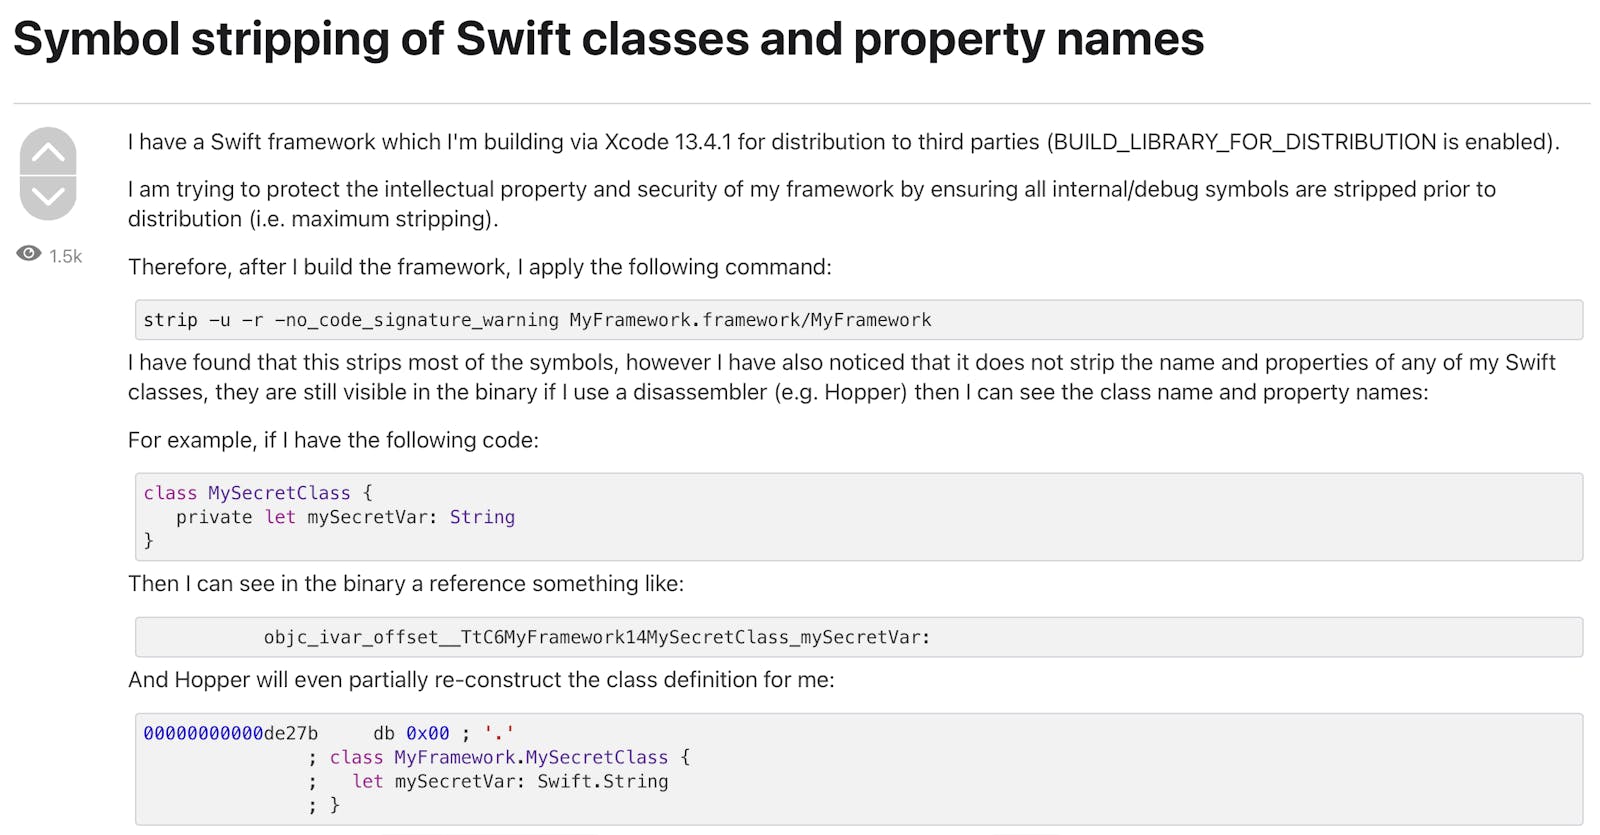 Your Swift app is full of symbols, even if stripped.